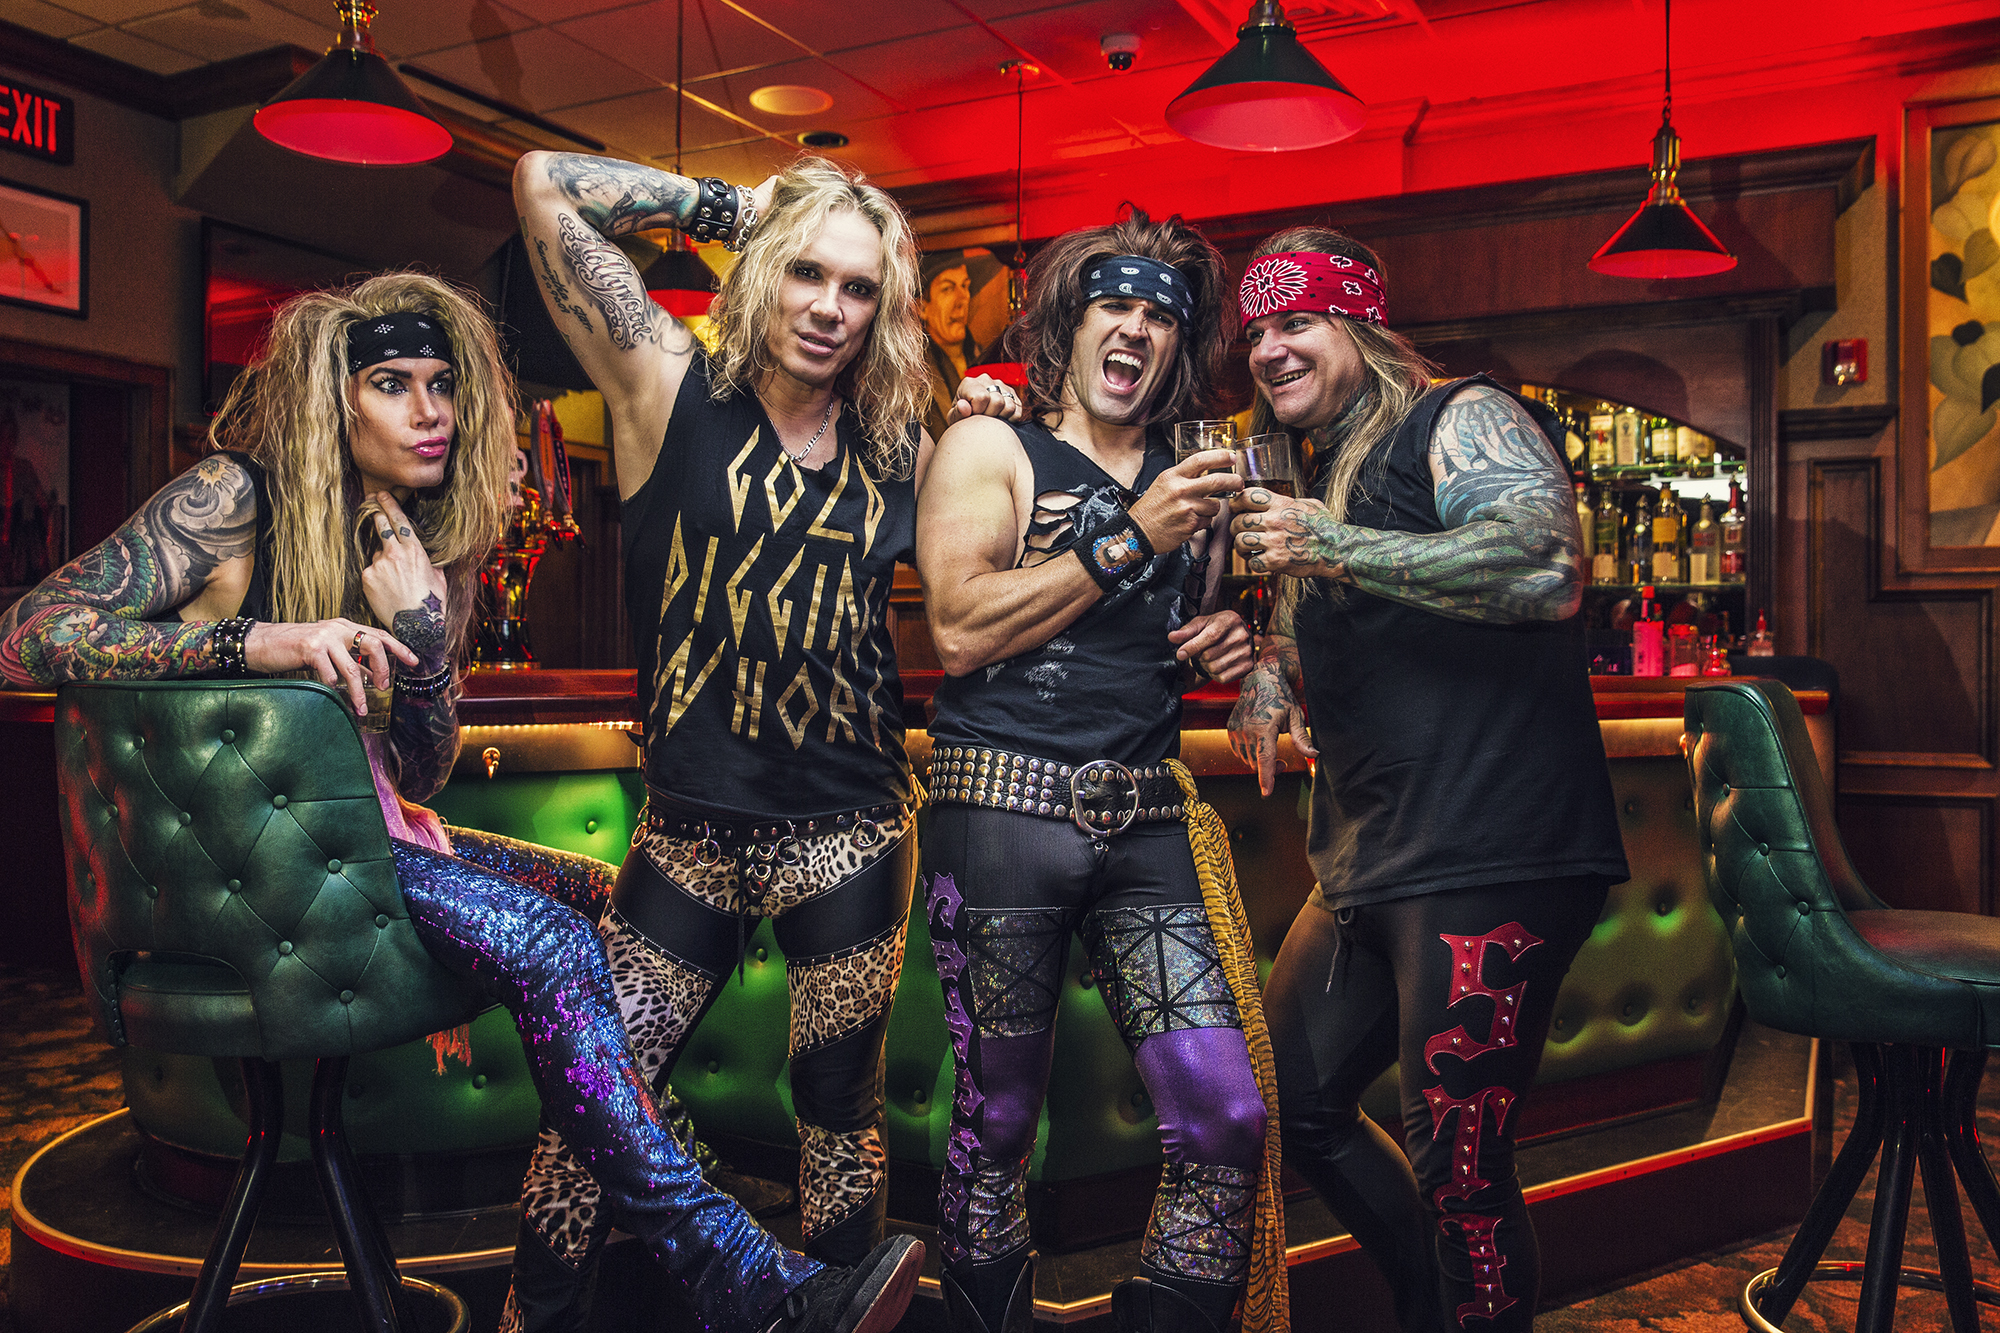 steel panther, glam rock, los angeles, berlin, balls out, lower the bar, michael starr